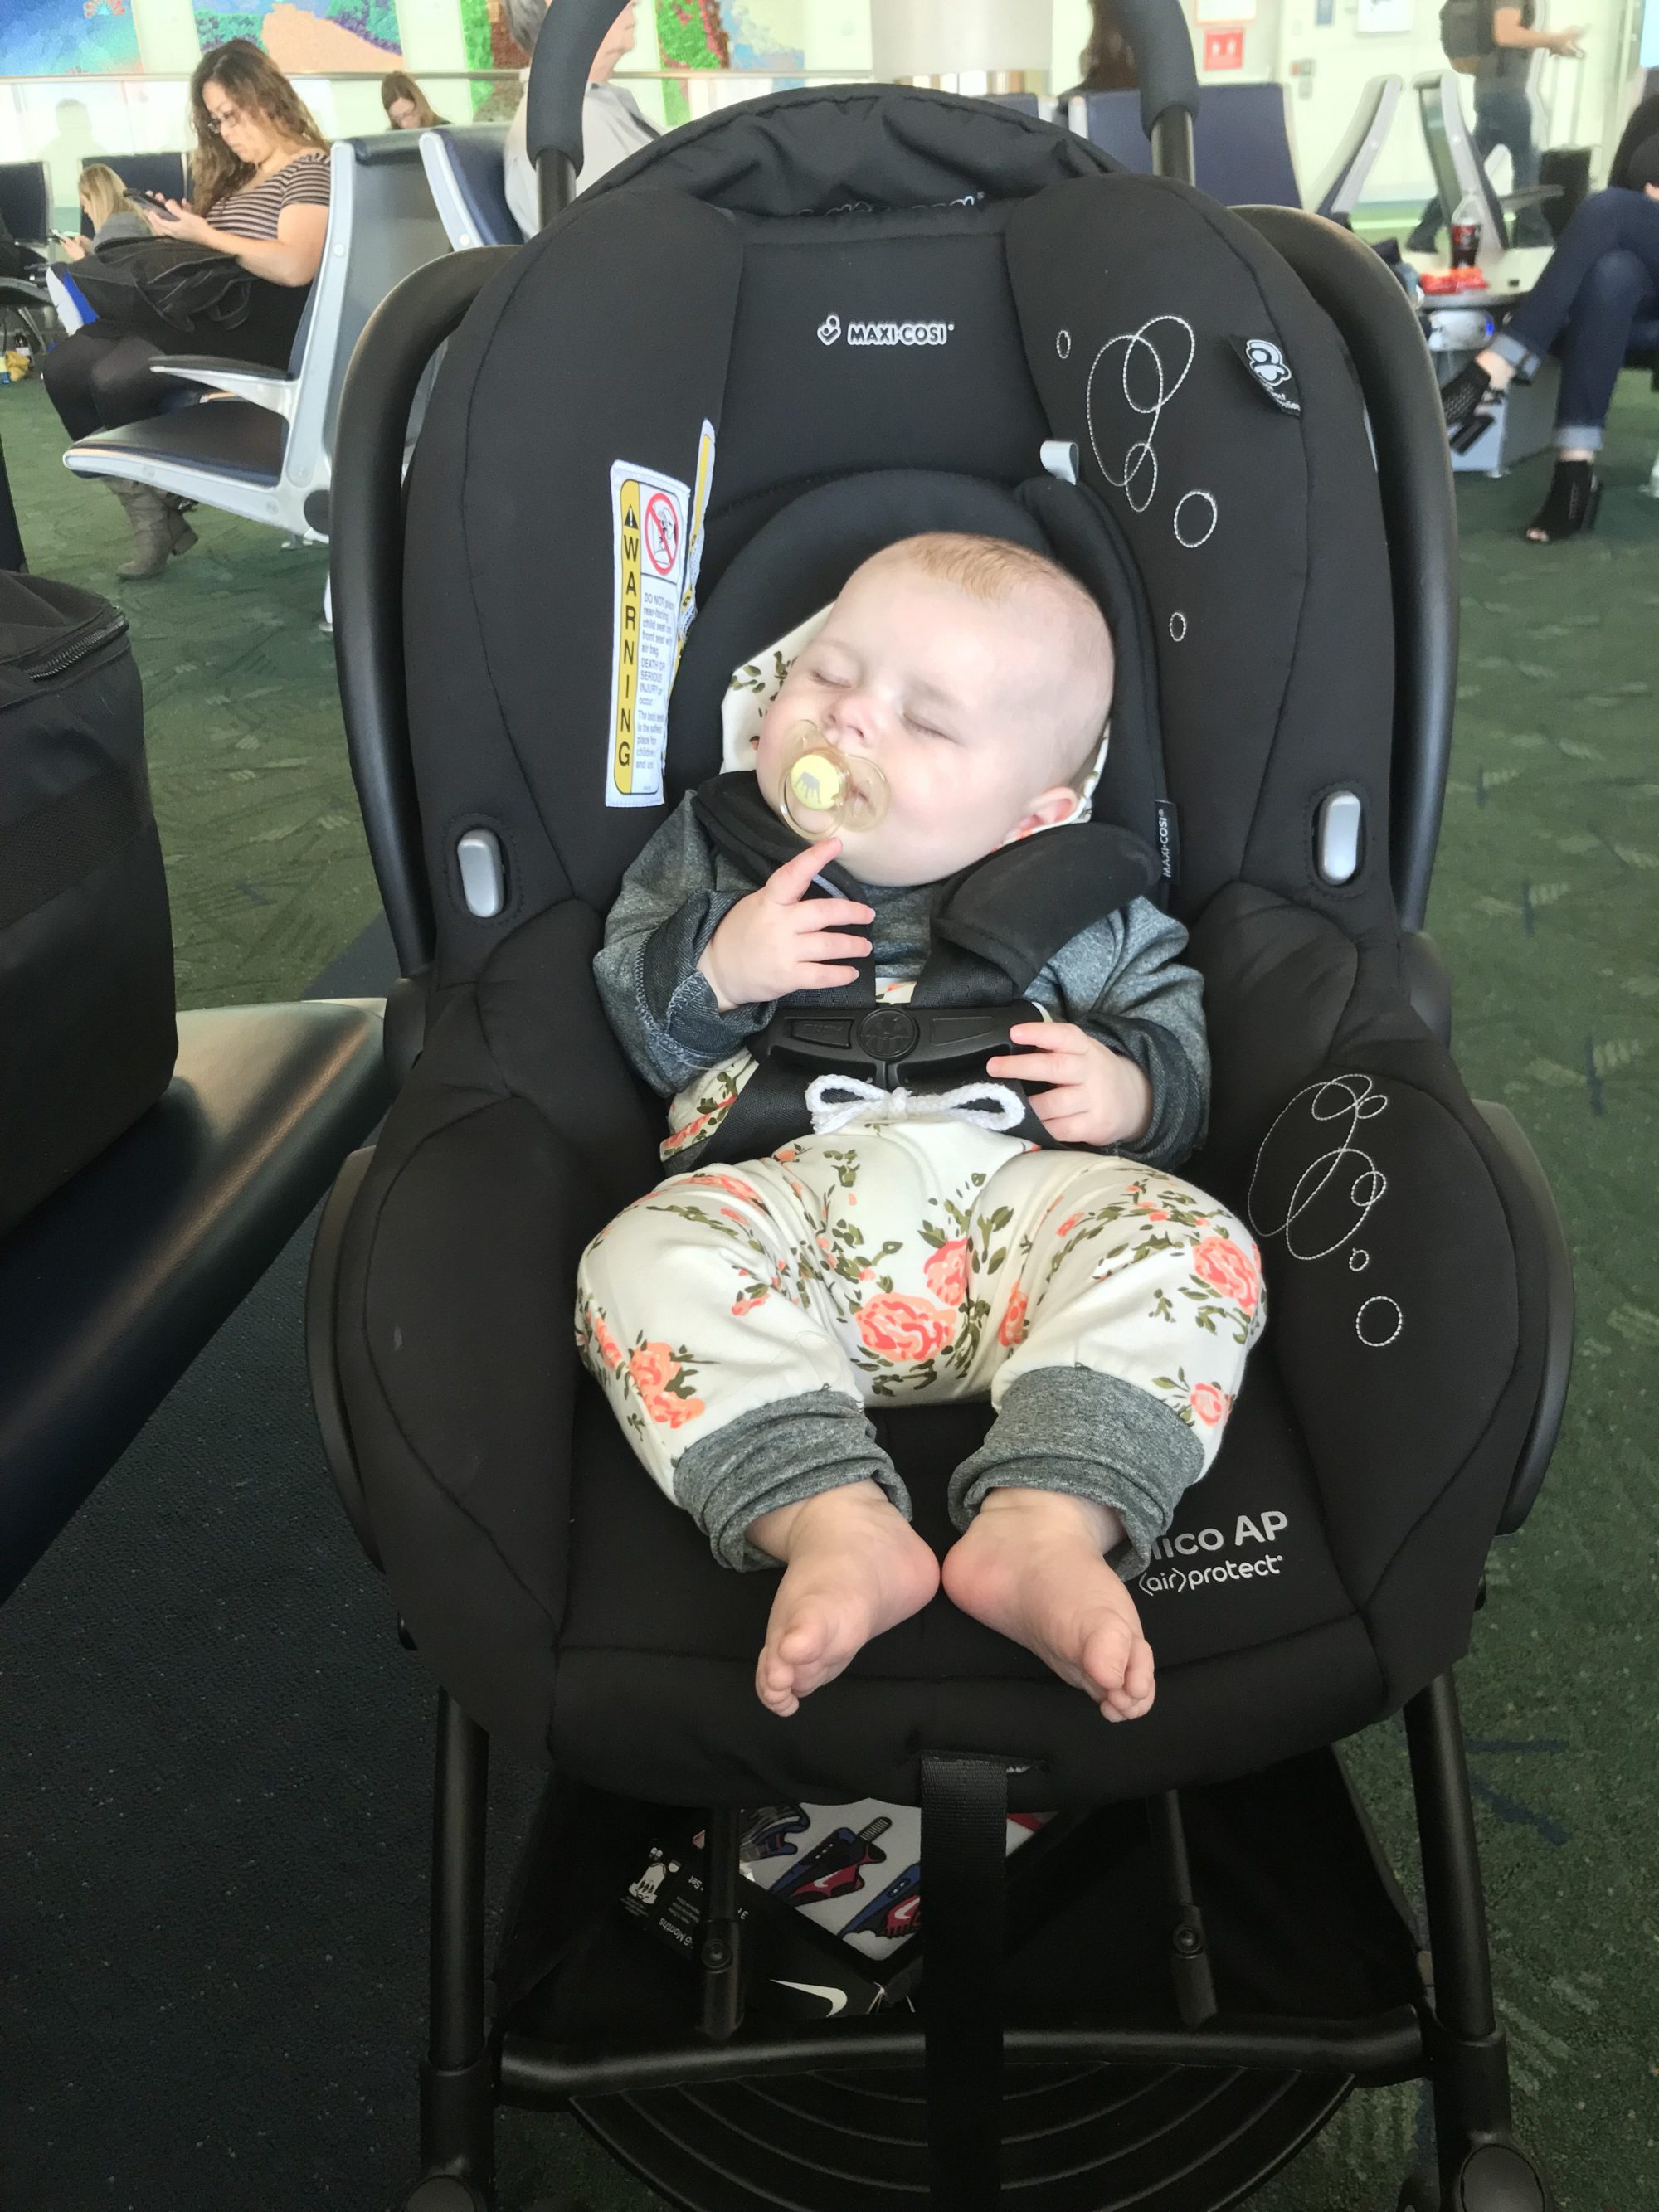 a baby in her stroller in the Portland airport